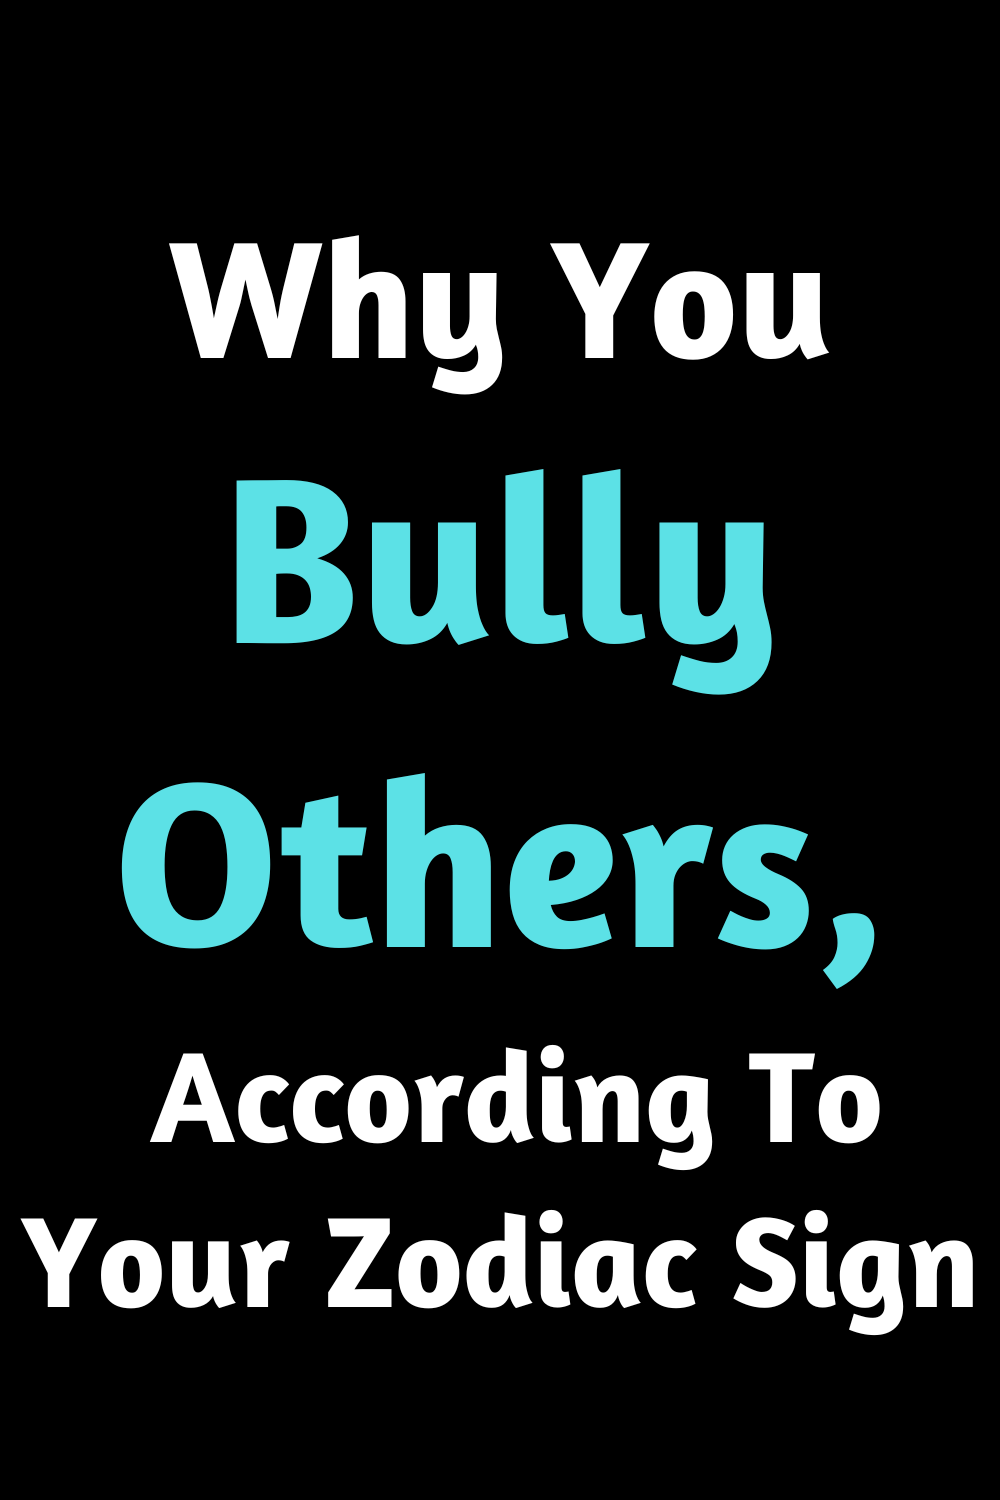 Why You Bully Others, According To Your Zodiac Sign